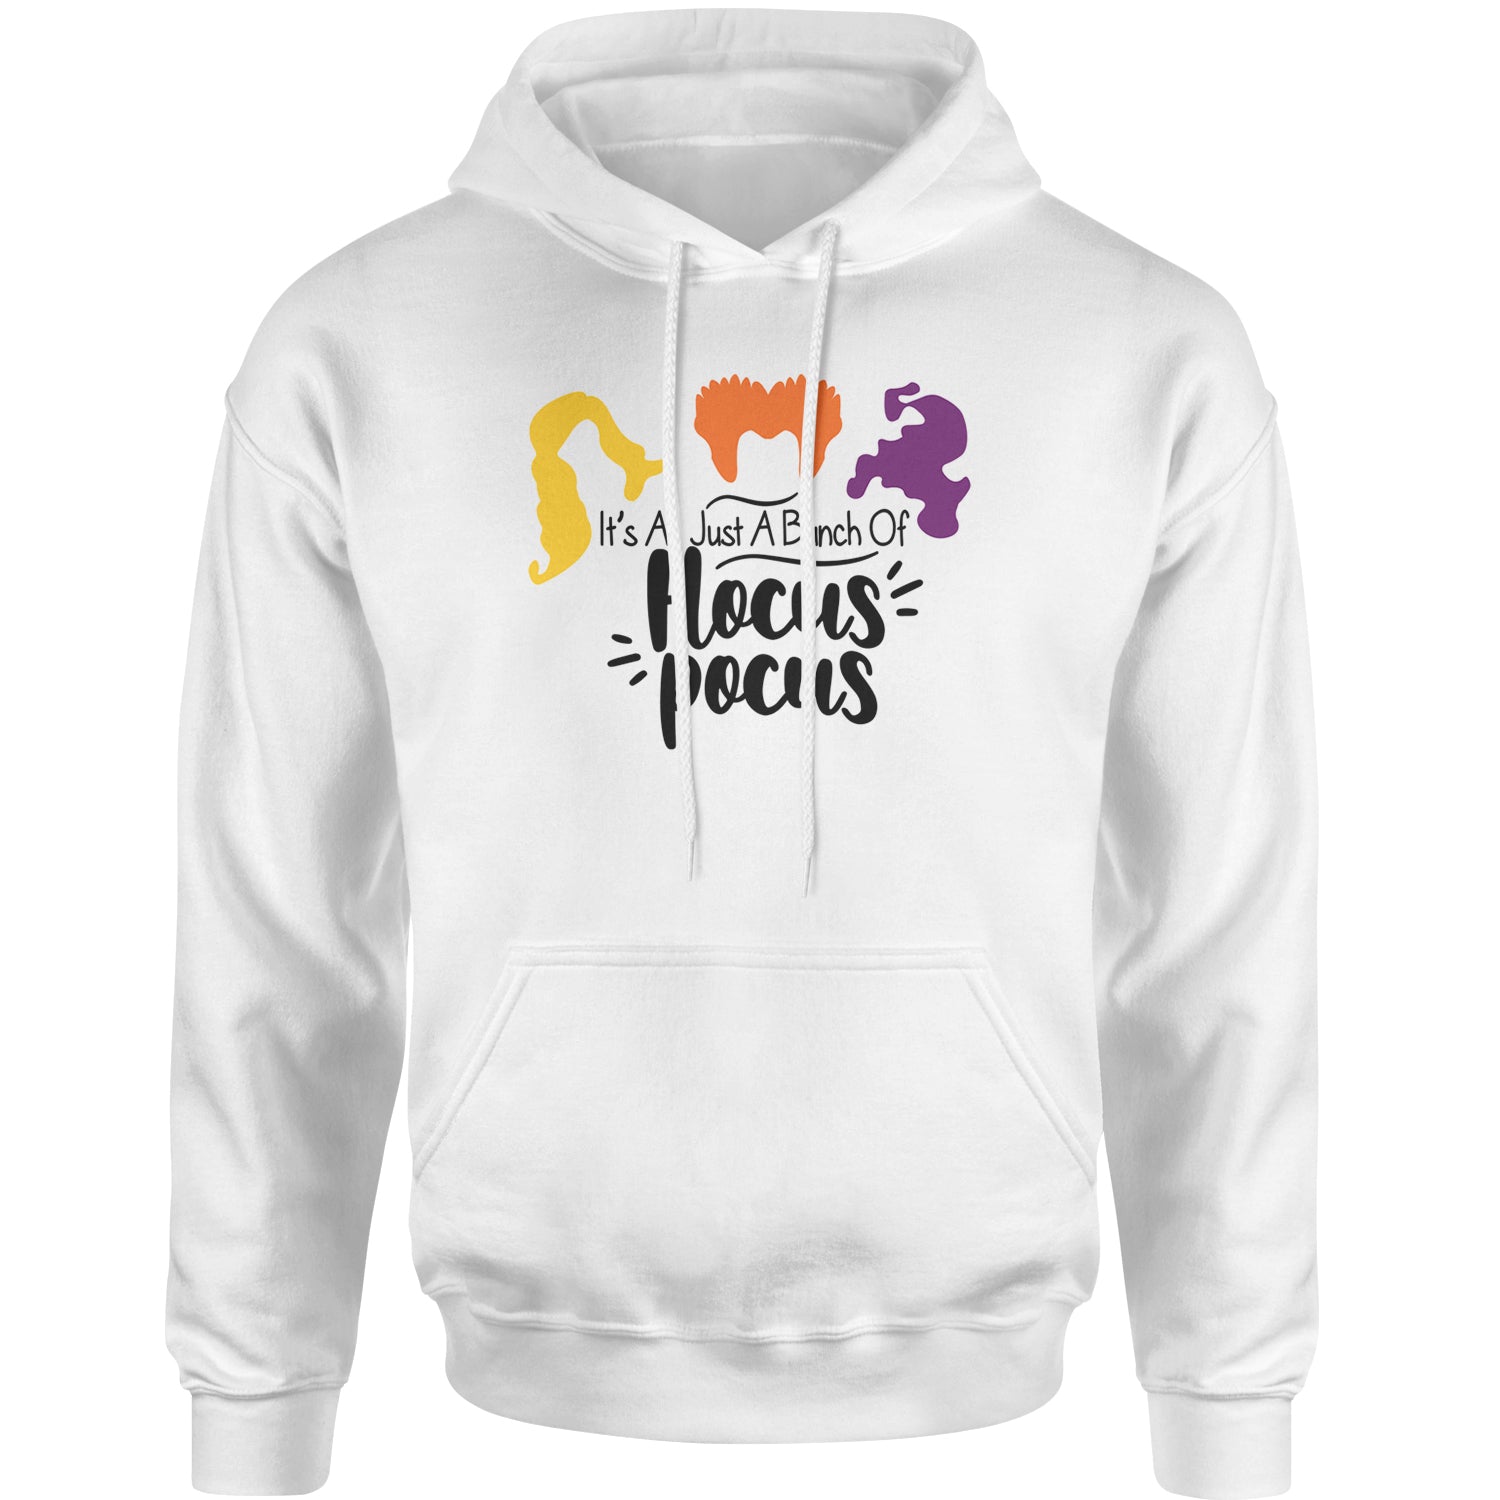 It's Just A Bunch Of Hocus Pocus Adult Hoodie Sweatshirt descendants, enchanted, eve, hallows, hocus, or, pocus, sanderson, sisters, treat, trick, witches by Expression Tees